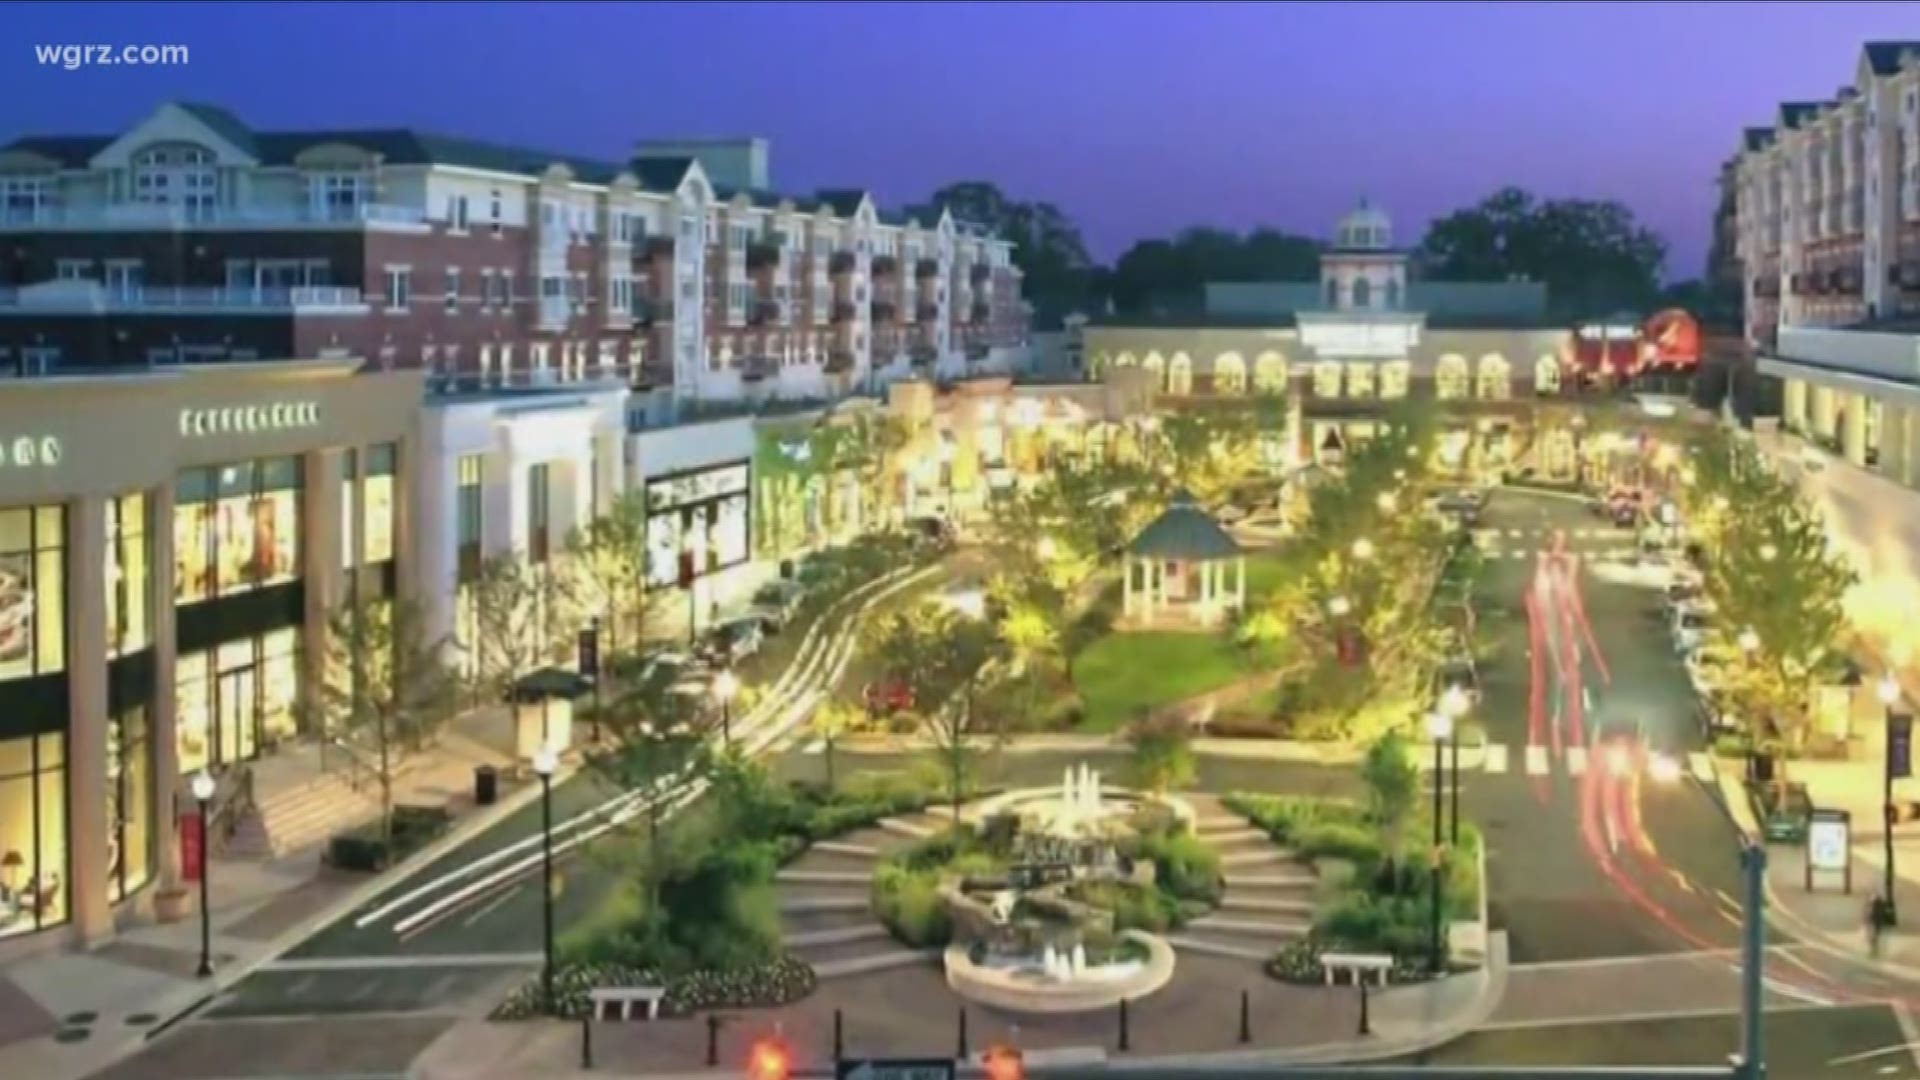 Uniland had some pretty exciting new details to share today -- about potential redevelopment of the eastern hills mall.